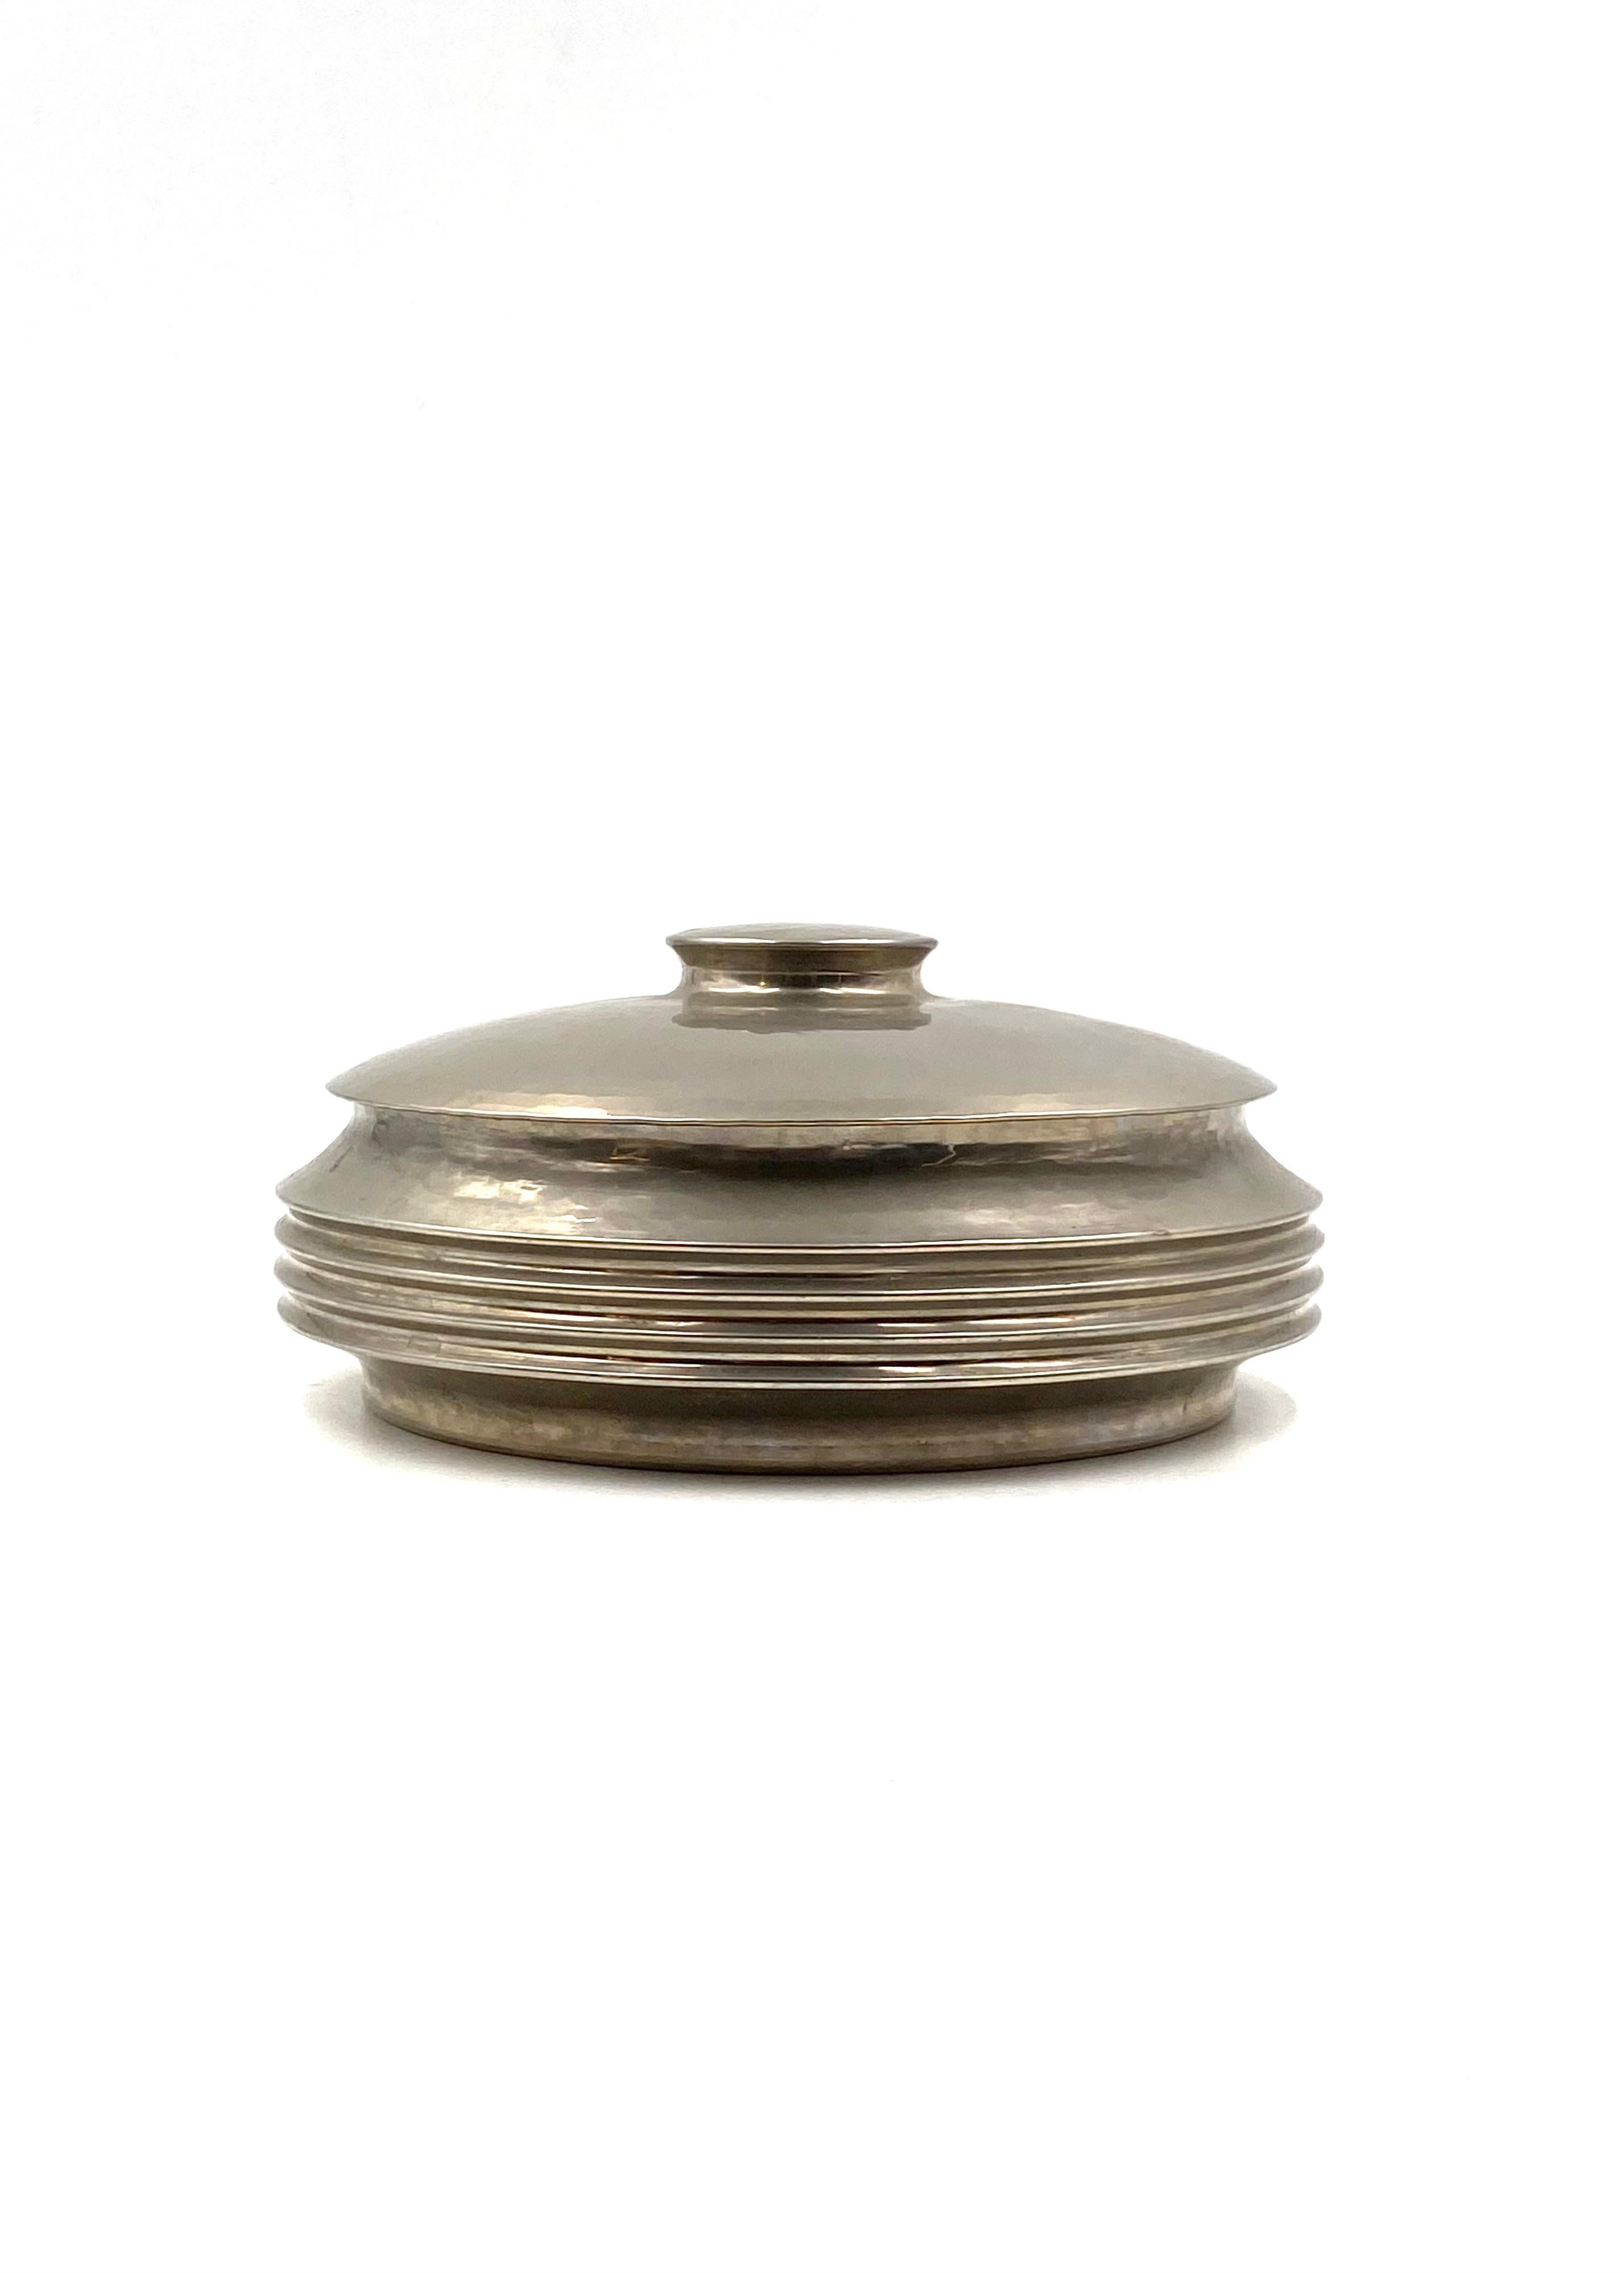 Midcentury silver-plated hand-hammered brass box, Zanetto Padova Italy 1970s For Sale 1